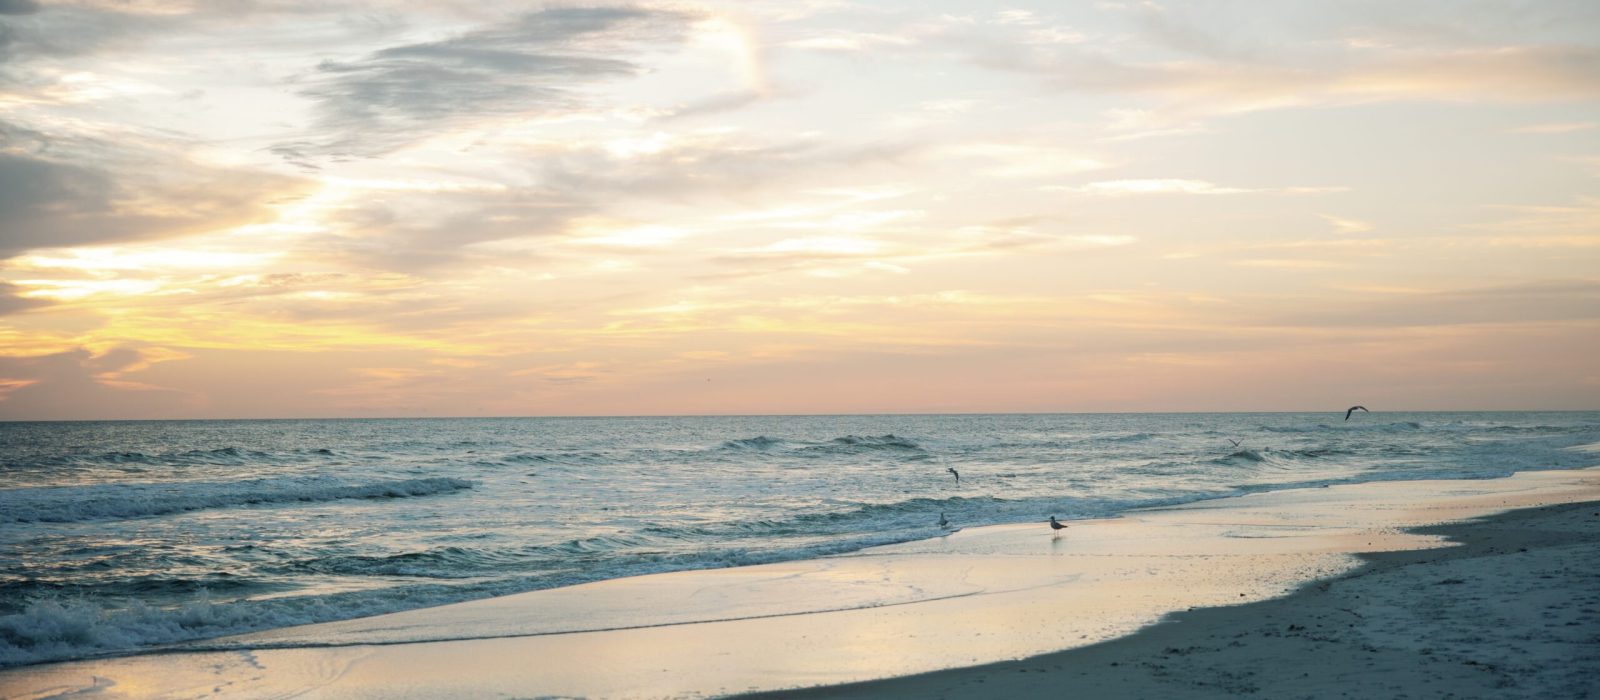 A person is standing on Rosemary Beach at sunset, capturing its beauty through photography during a retreat.